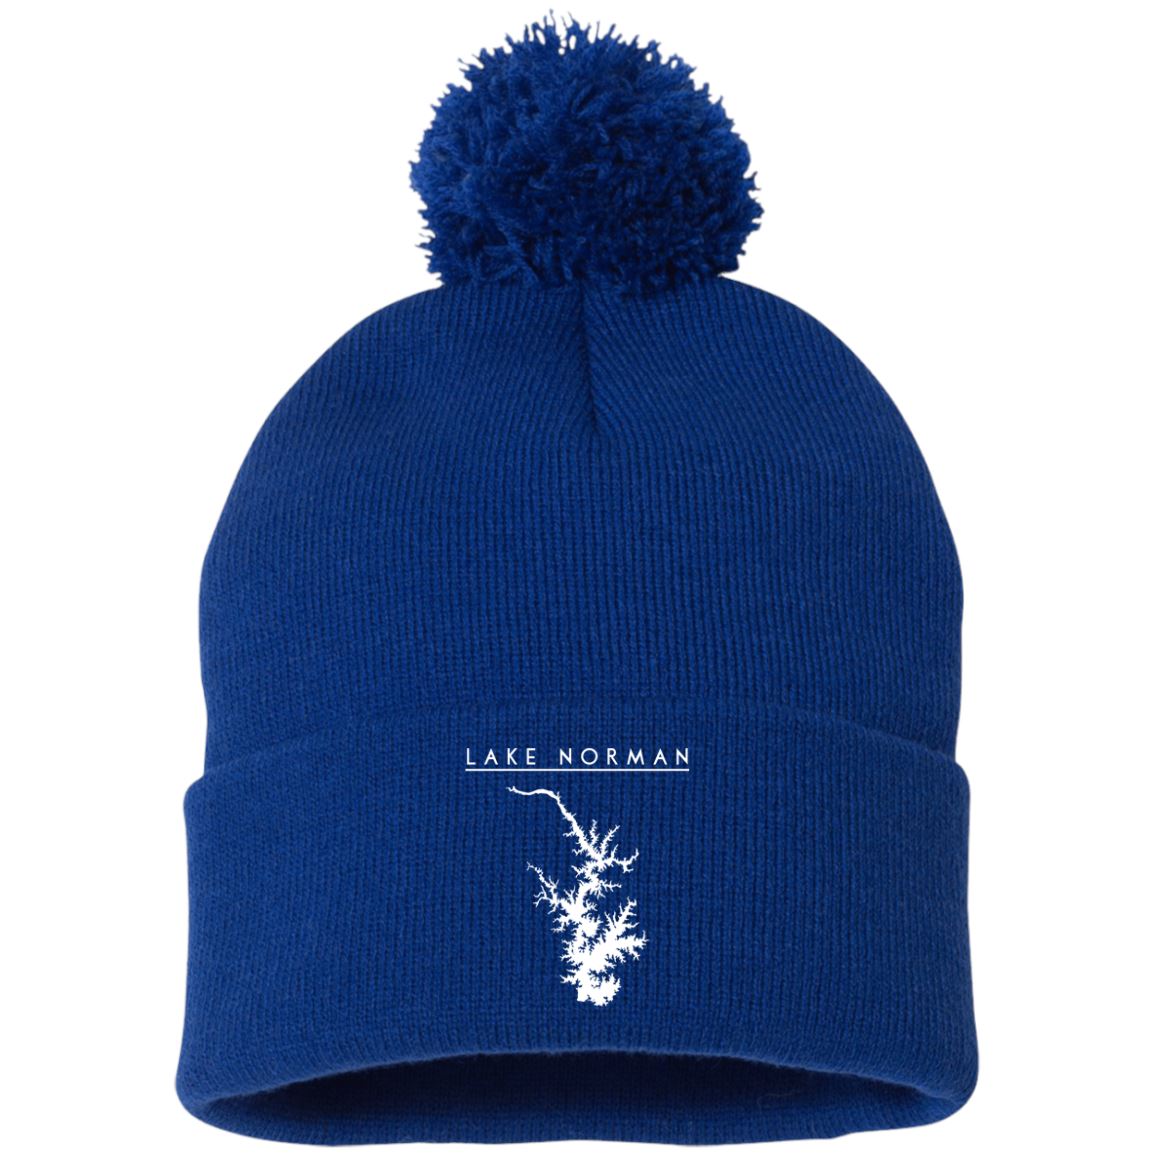 Lake Norman Embroidered Sportsman Pom Pom Knit Cap - Houseboat Kings